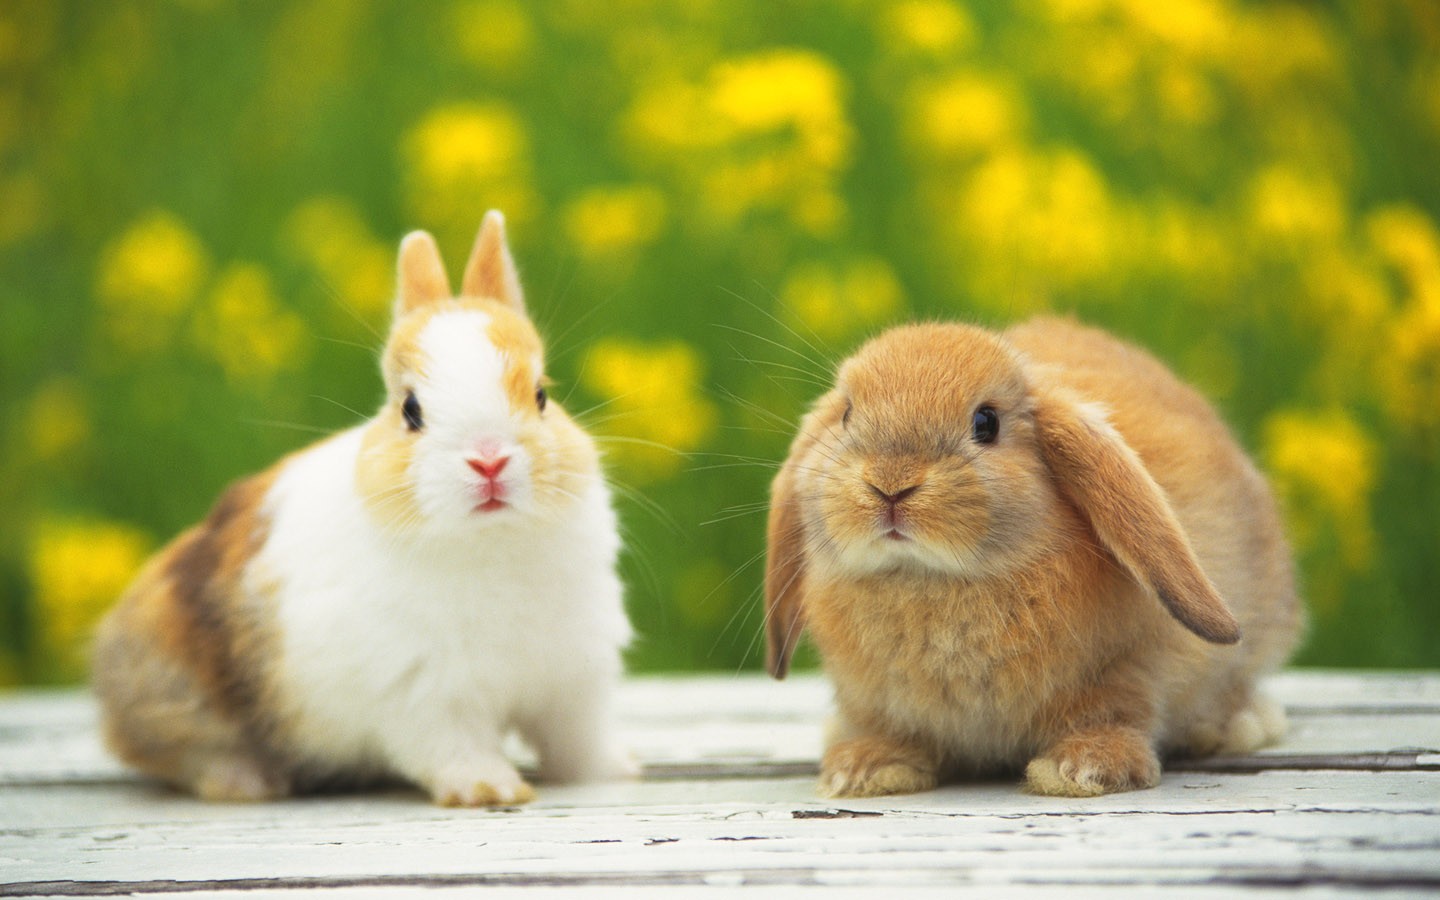 Cute Baby Rabbits Wallpaper HD Background Image